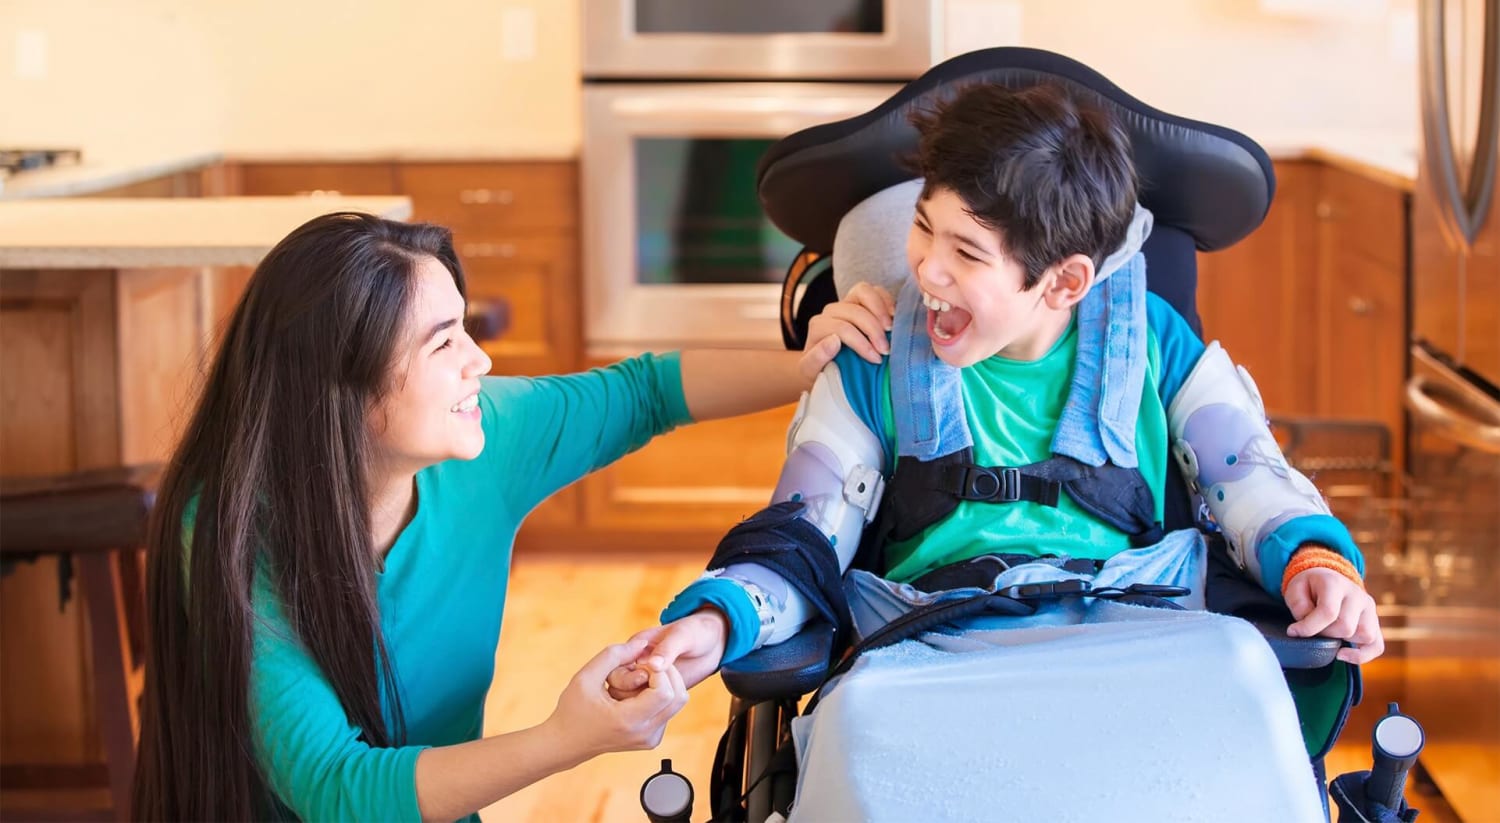 Cerebral Palsy Treatment in India - Low-Cost Stem Cell for Cerebral Palsy Child